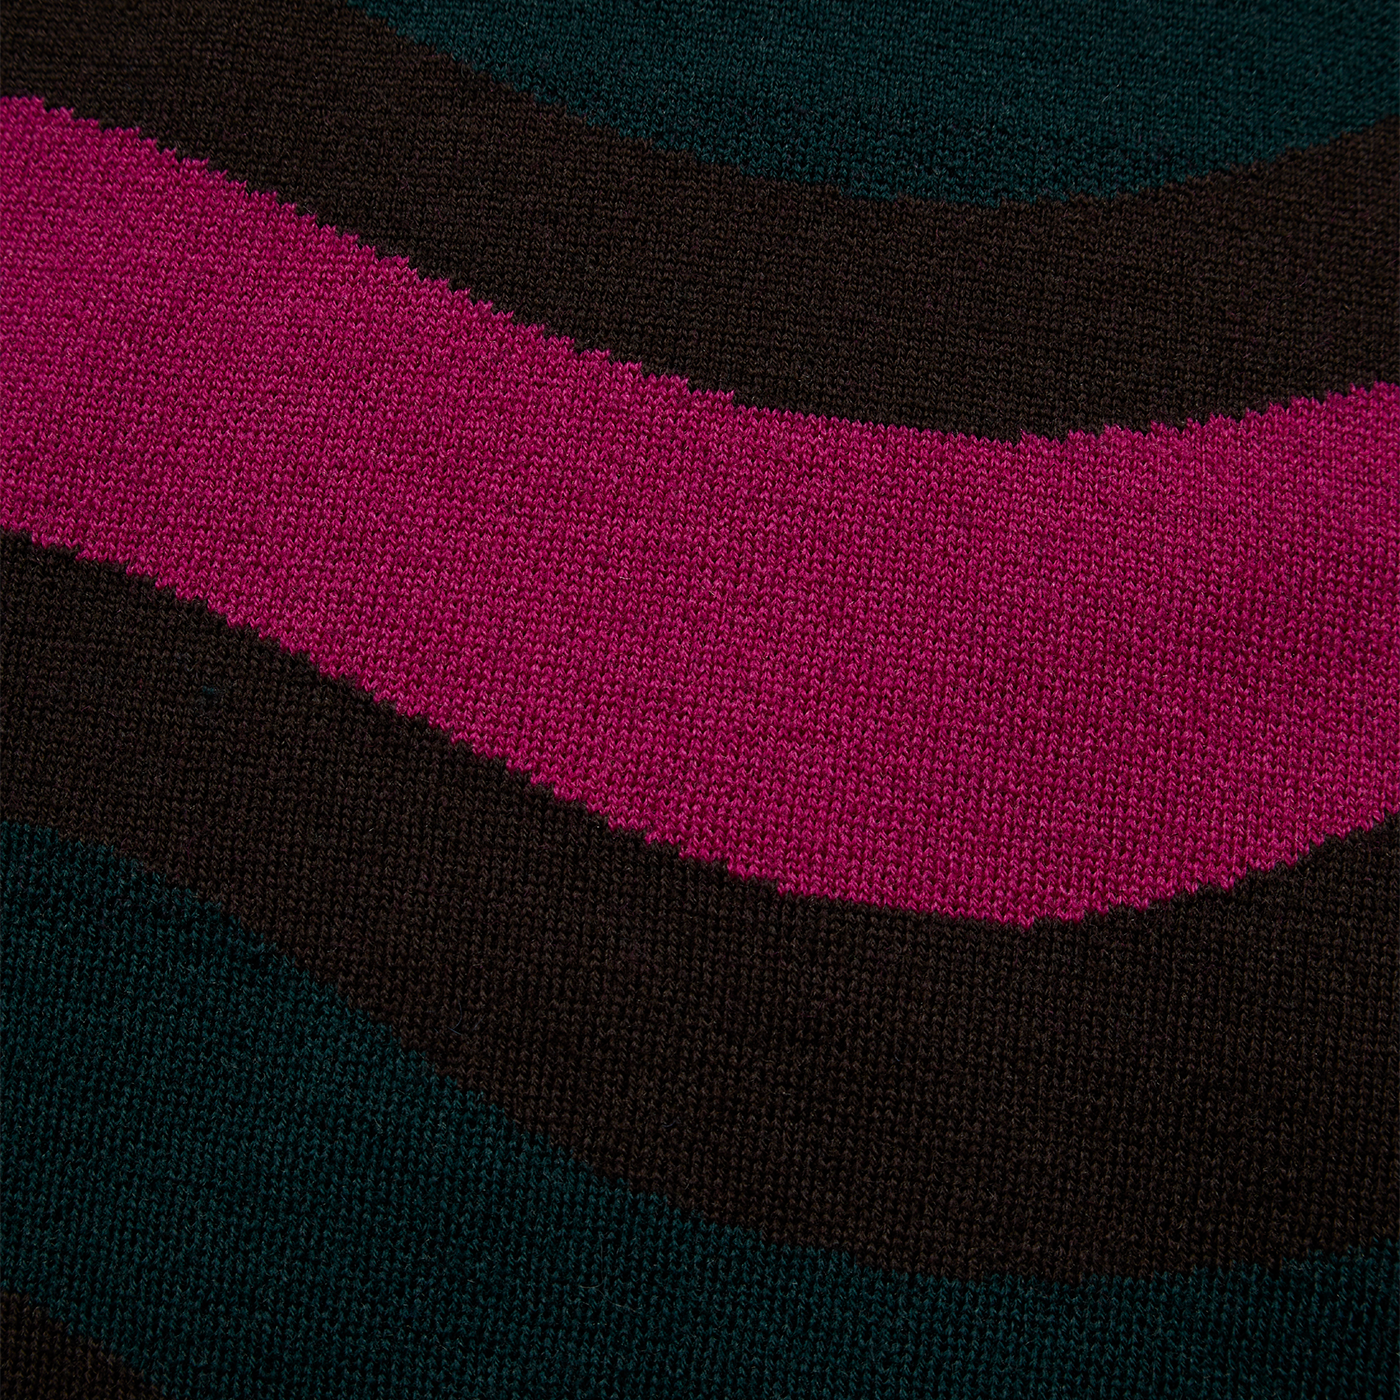 One Weird Wave Knitted Pullover